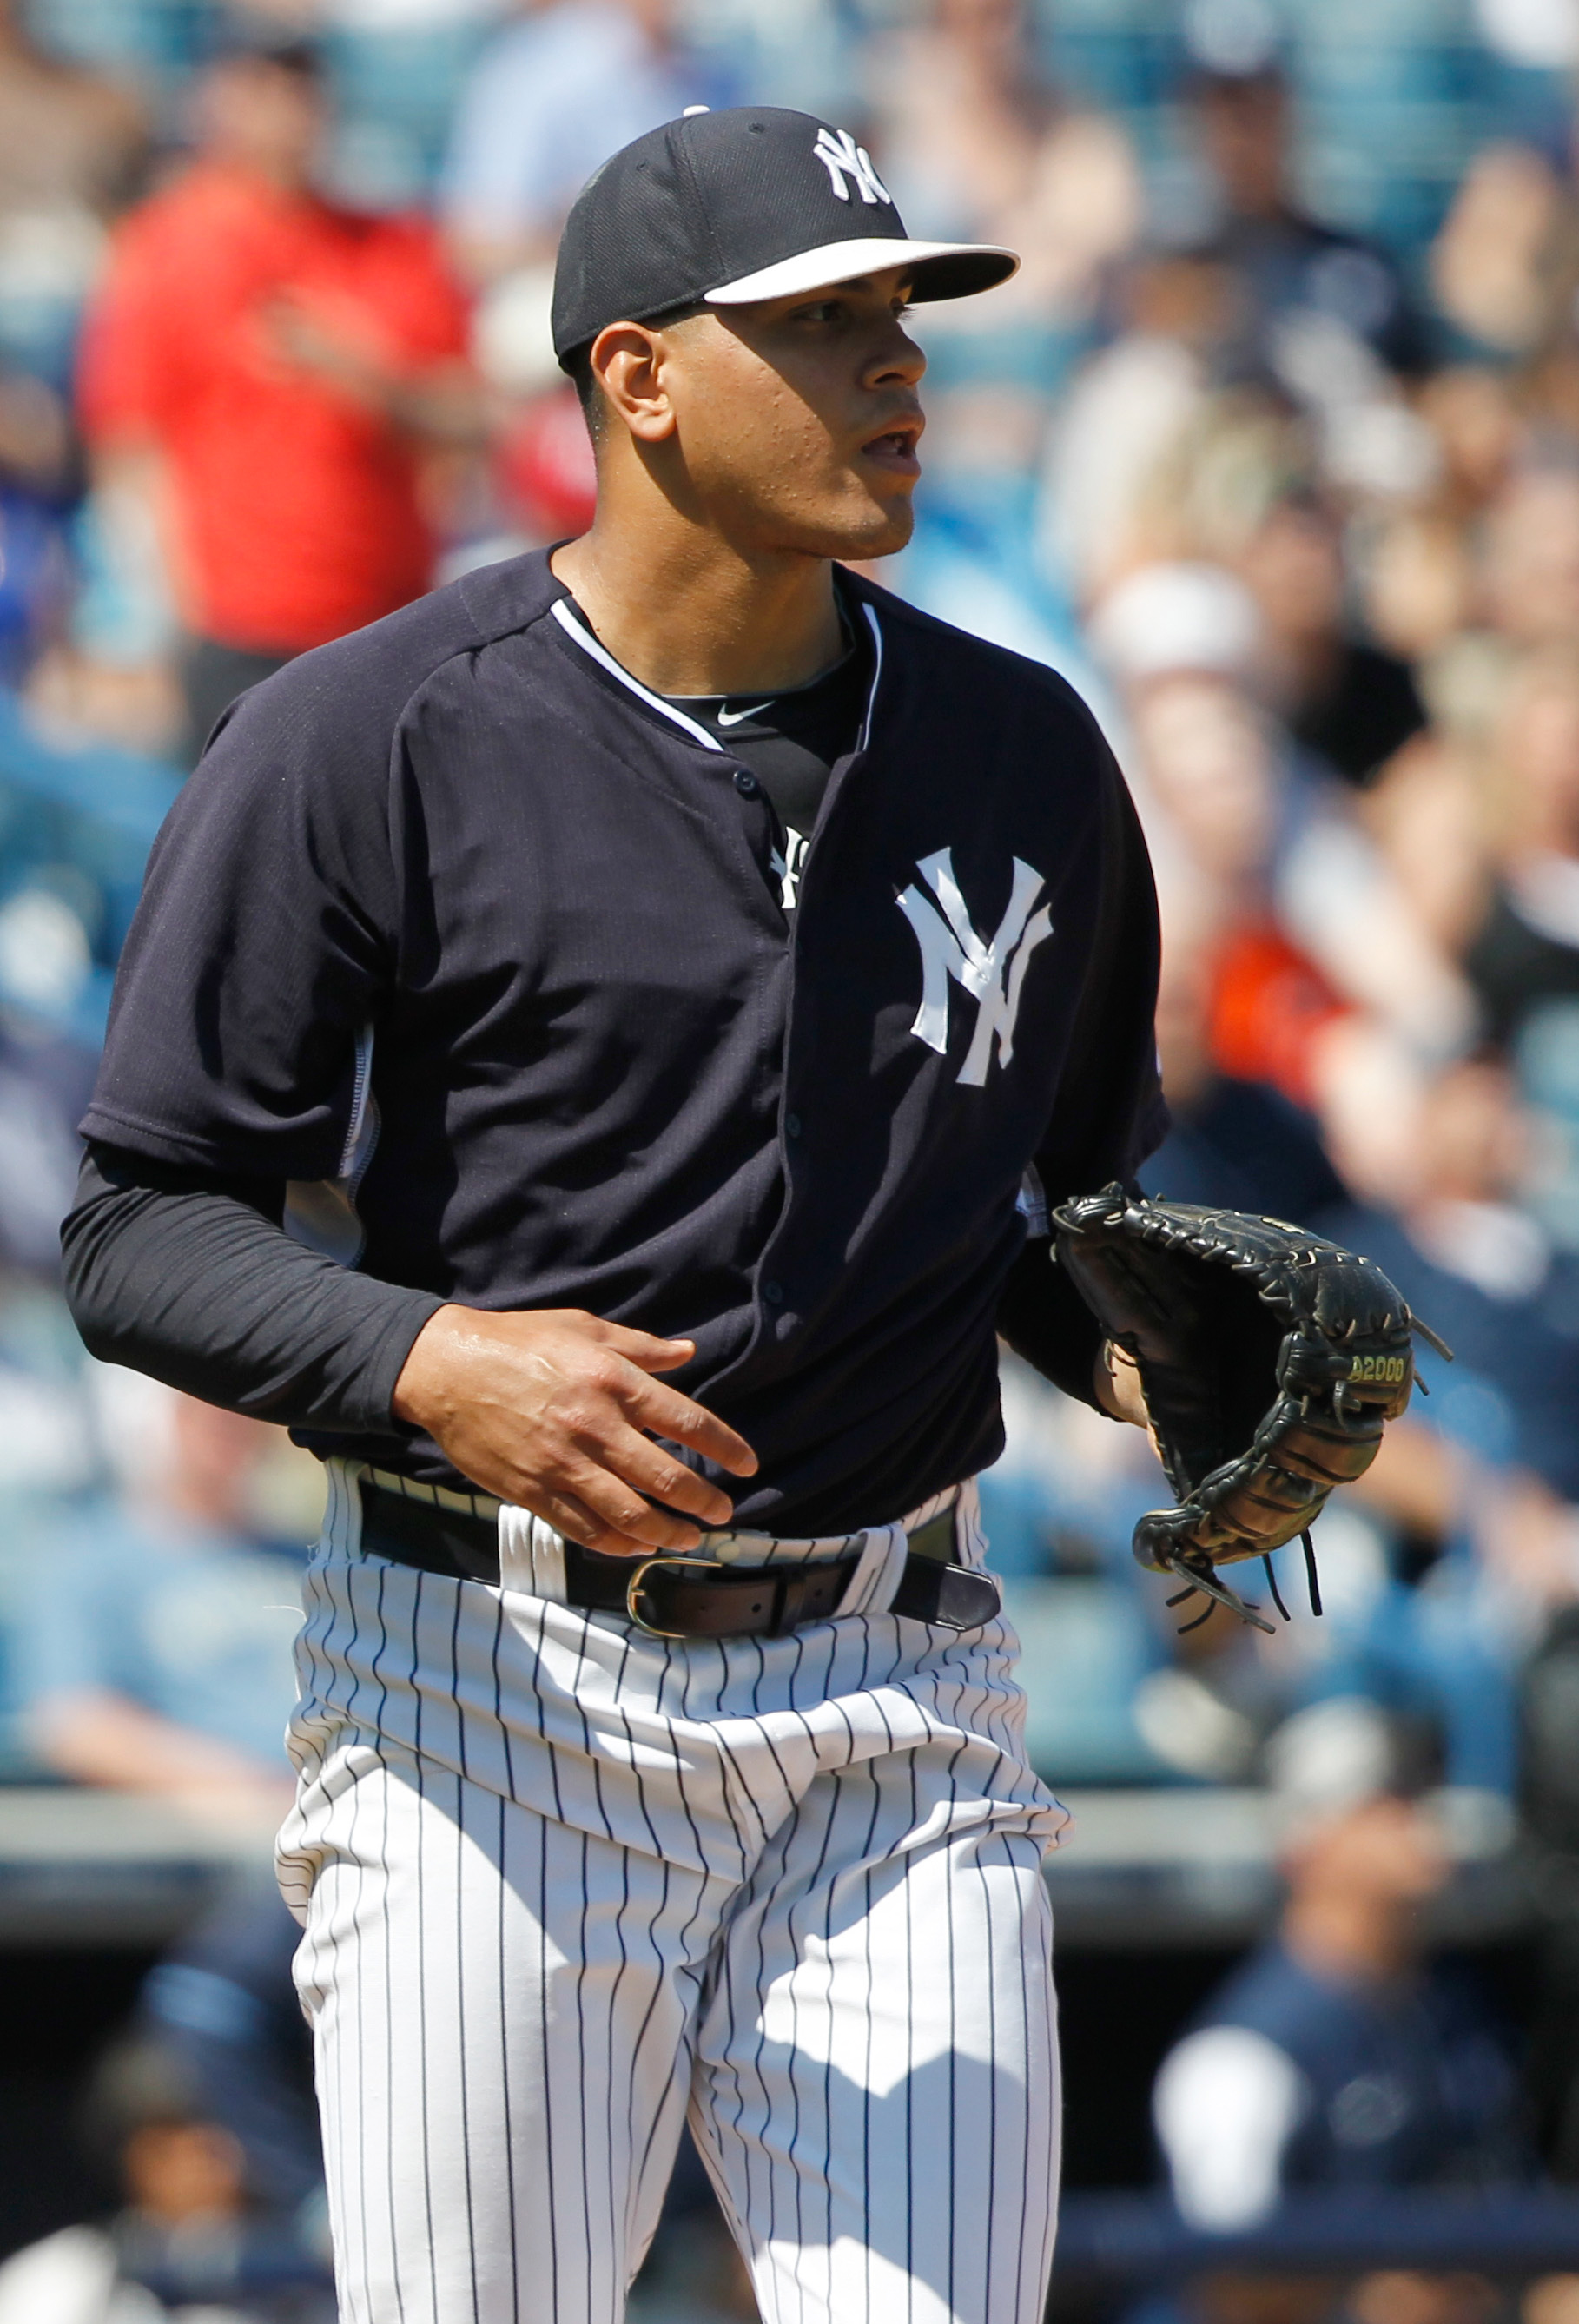 Dellin Betances likely becomes the Yankees next closer. (USA TODAY Sports)